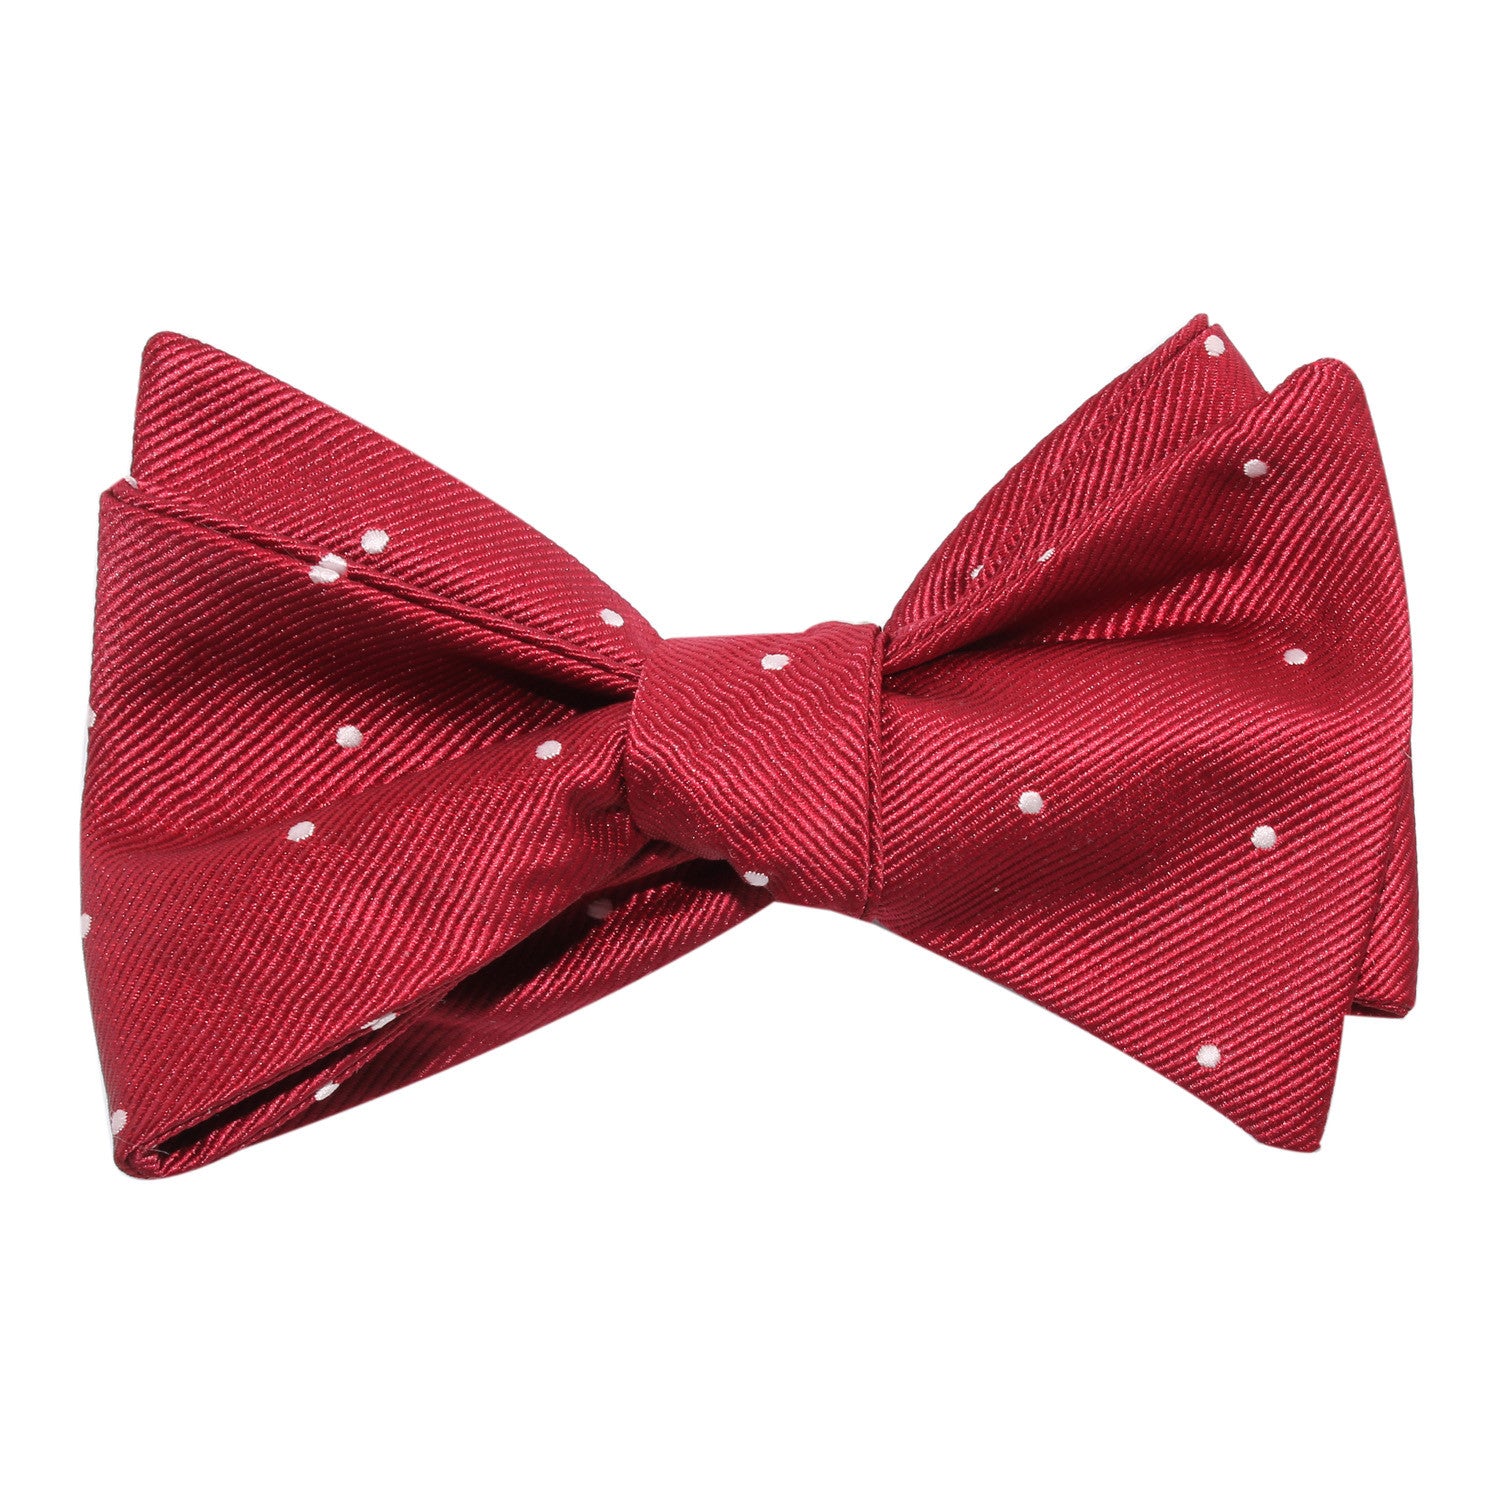 Maroon with White Polka Dots Self Tie Bow Tie 1